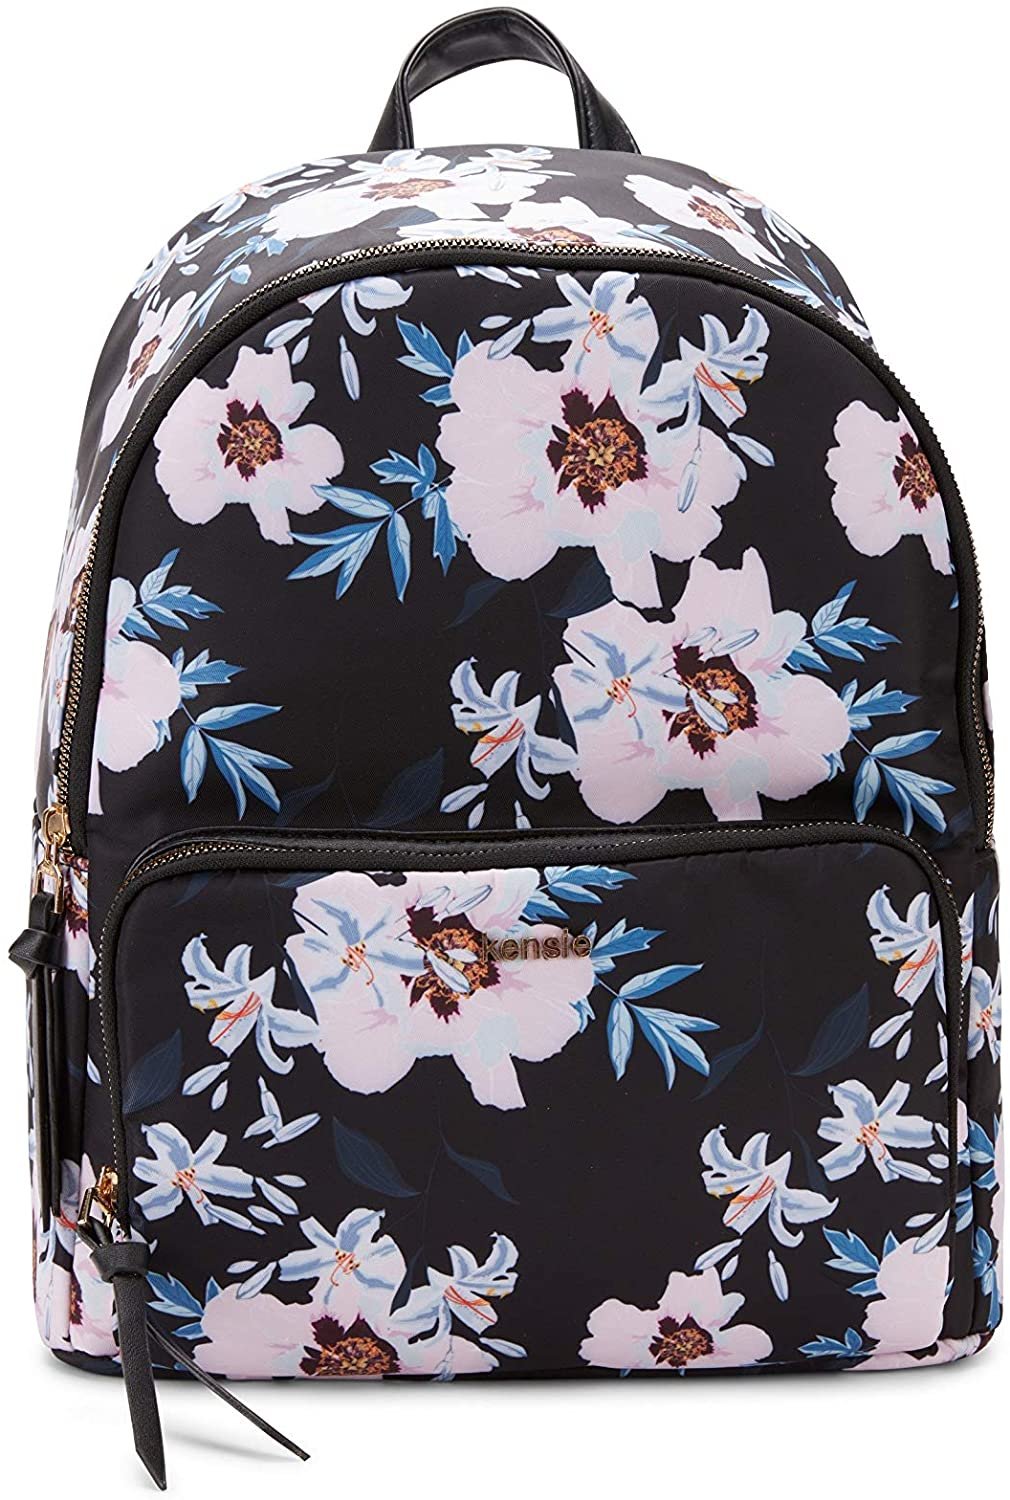 Canis Ladies Floral Backpack Travel Faux Leather Handbag India | Ubuy